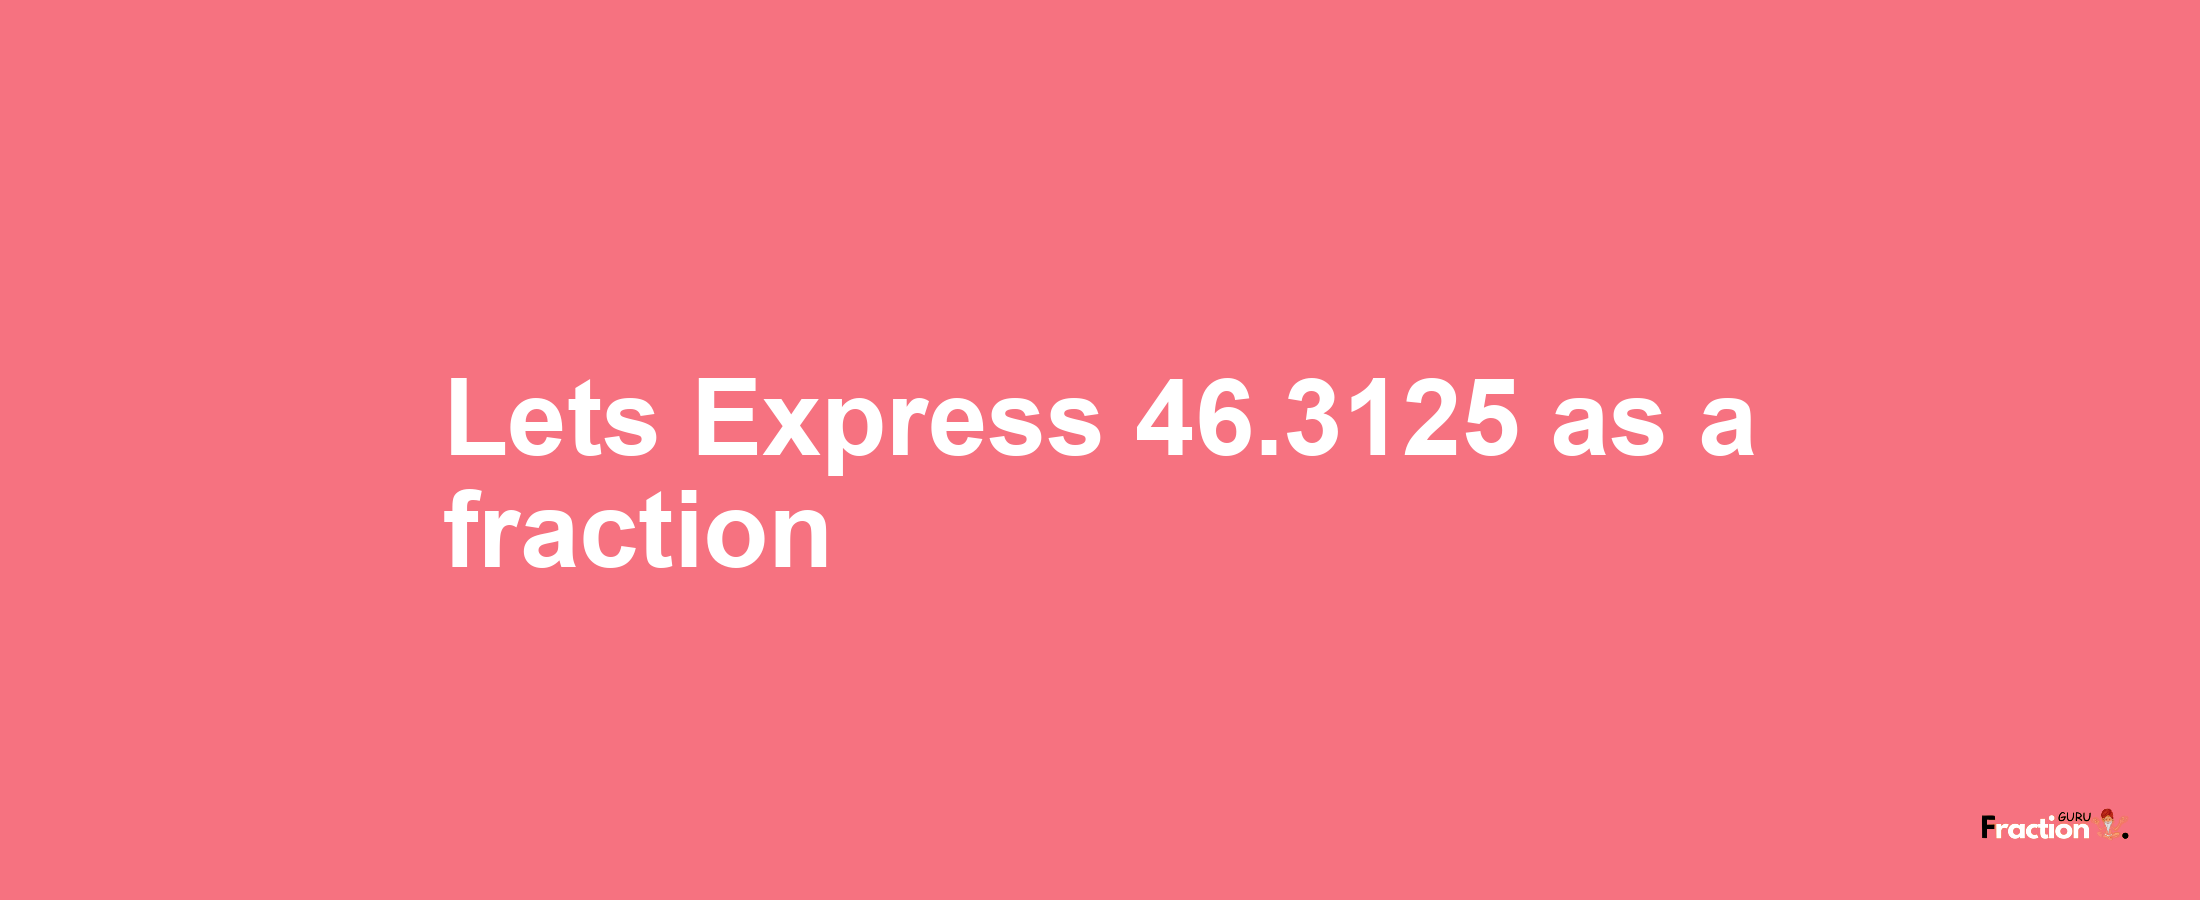 Lets Express 46.3125 as afraction